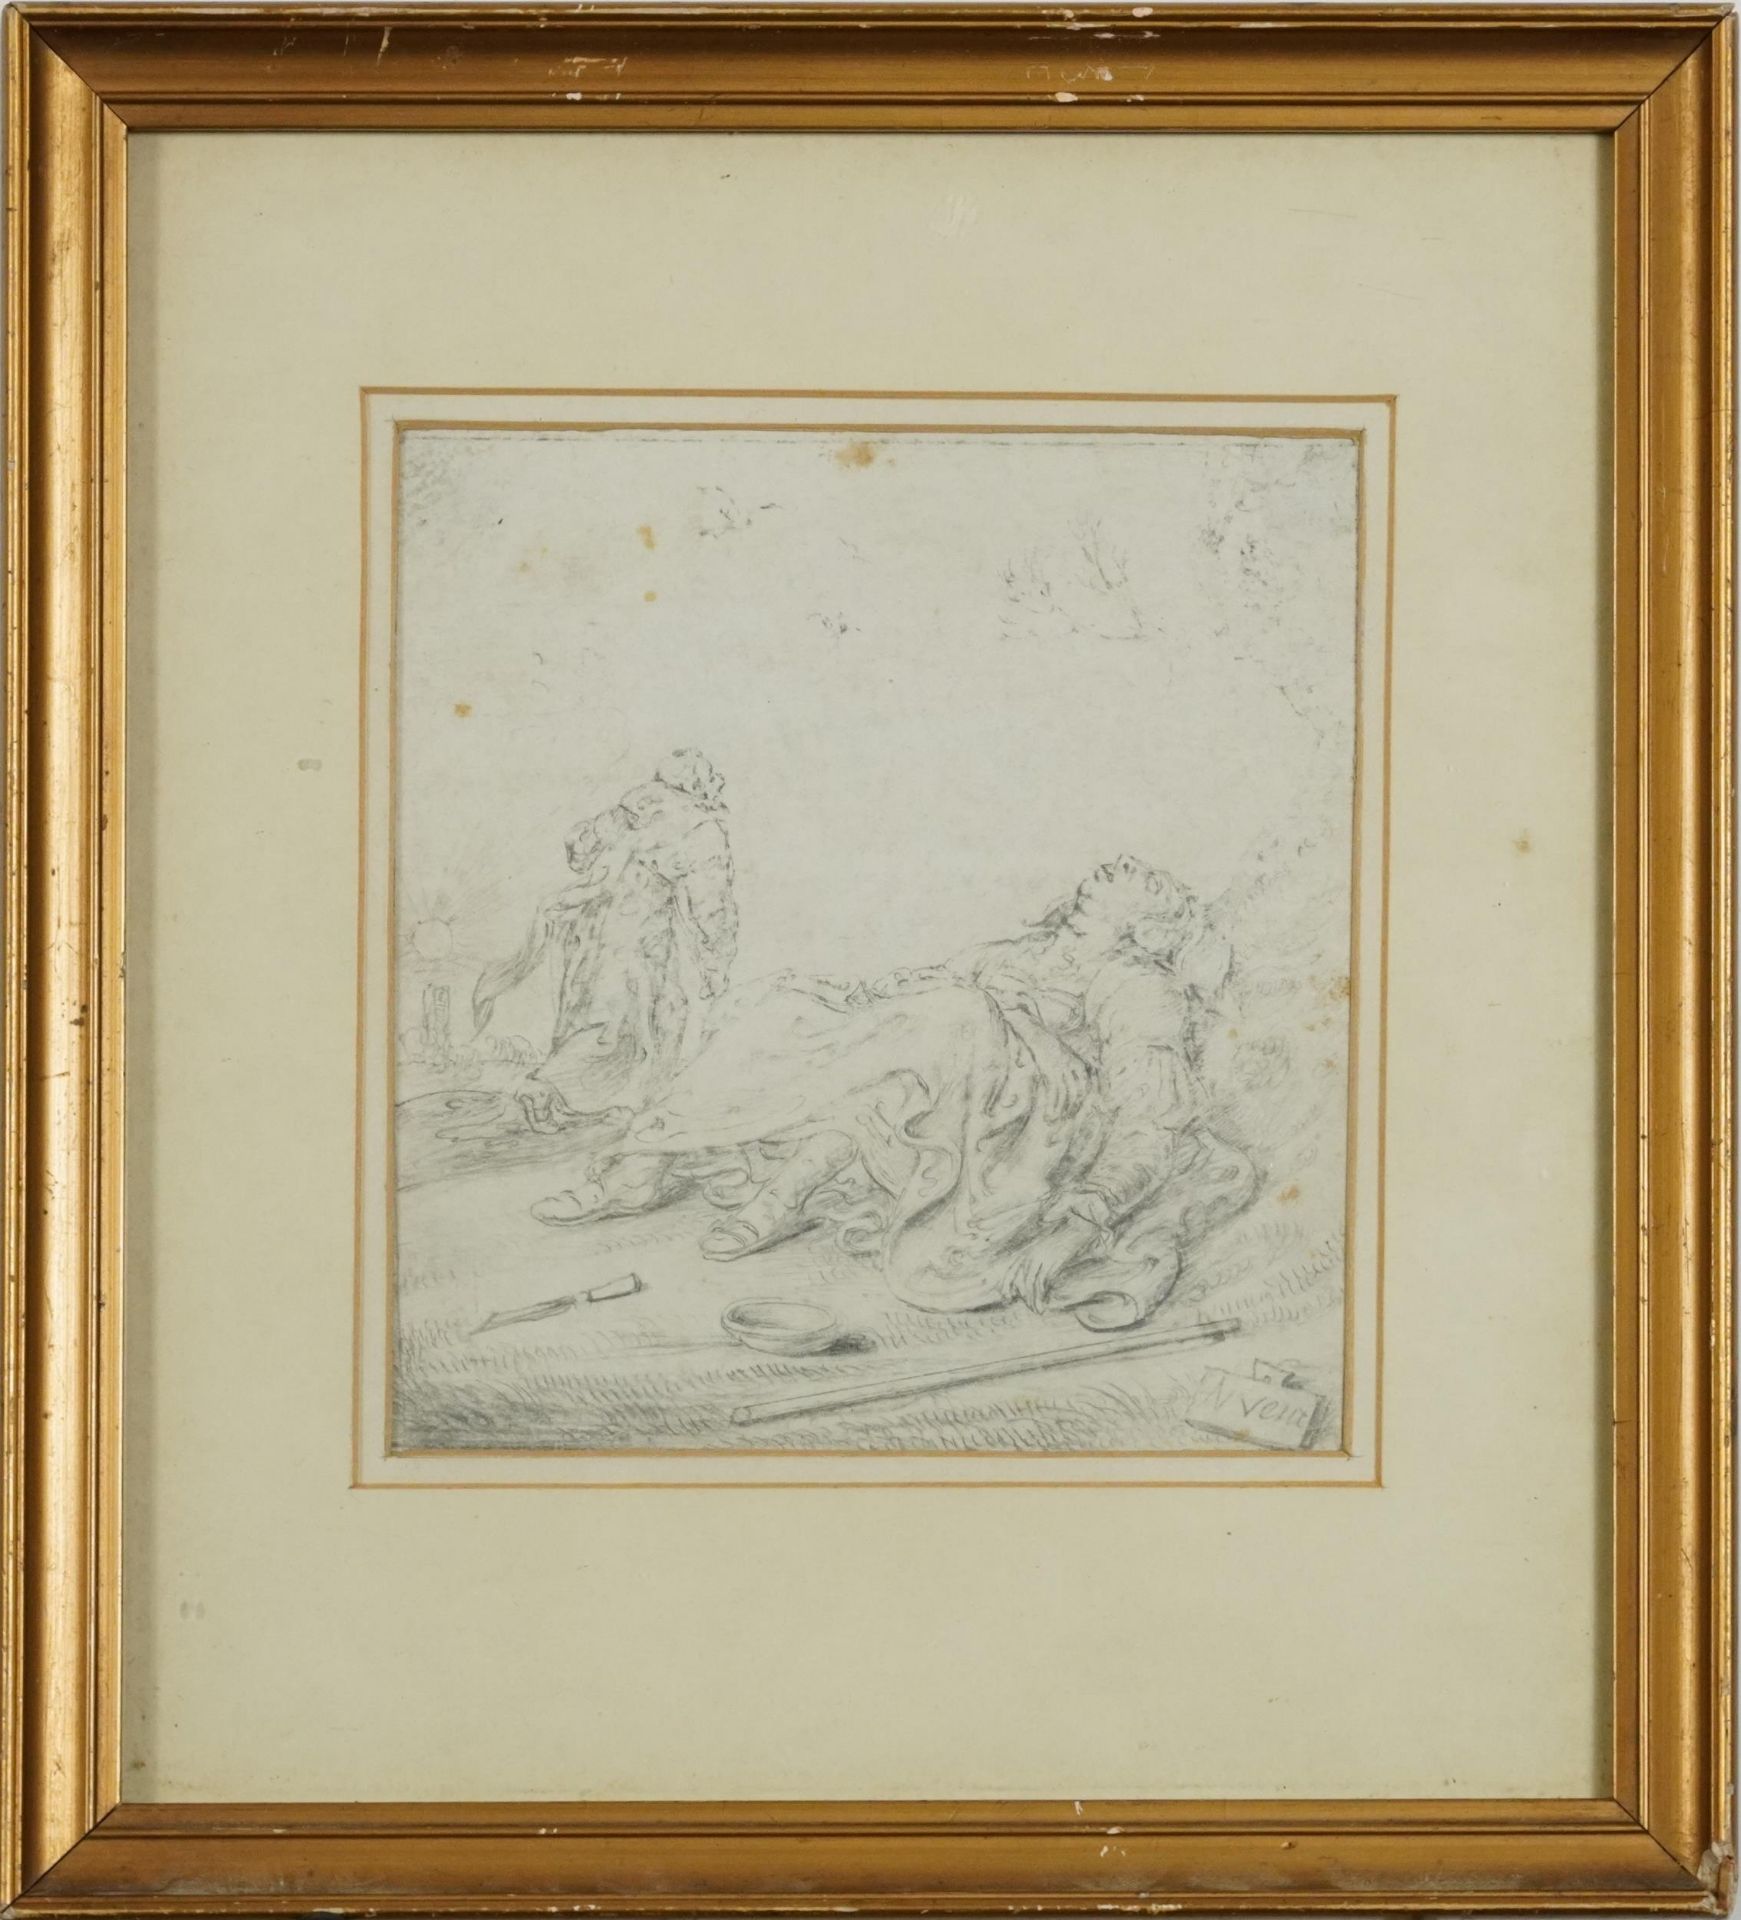 Two figures, possibly biblical, 19th century pencil, indistinctly signed, possibly N Veia?, mounted, - Image 2 of 3